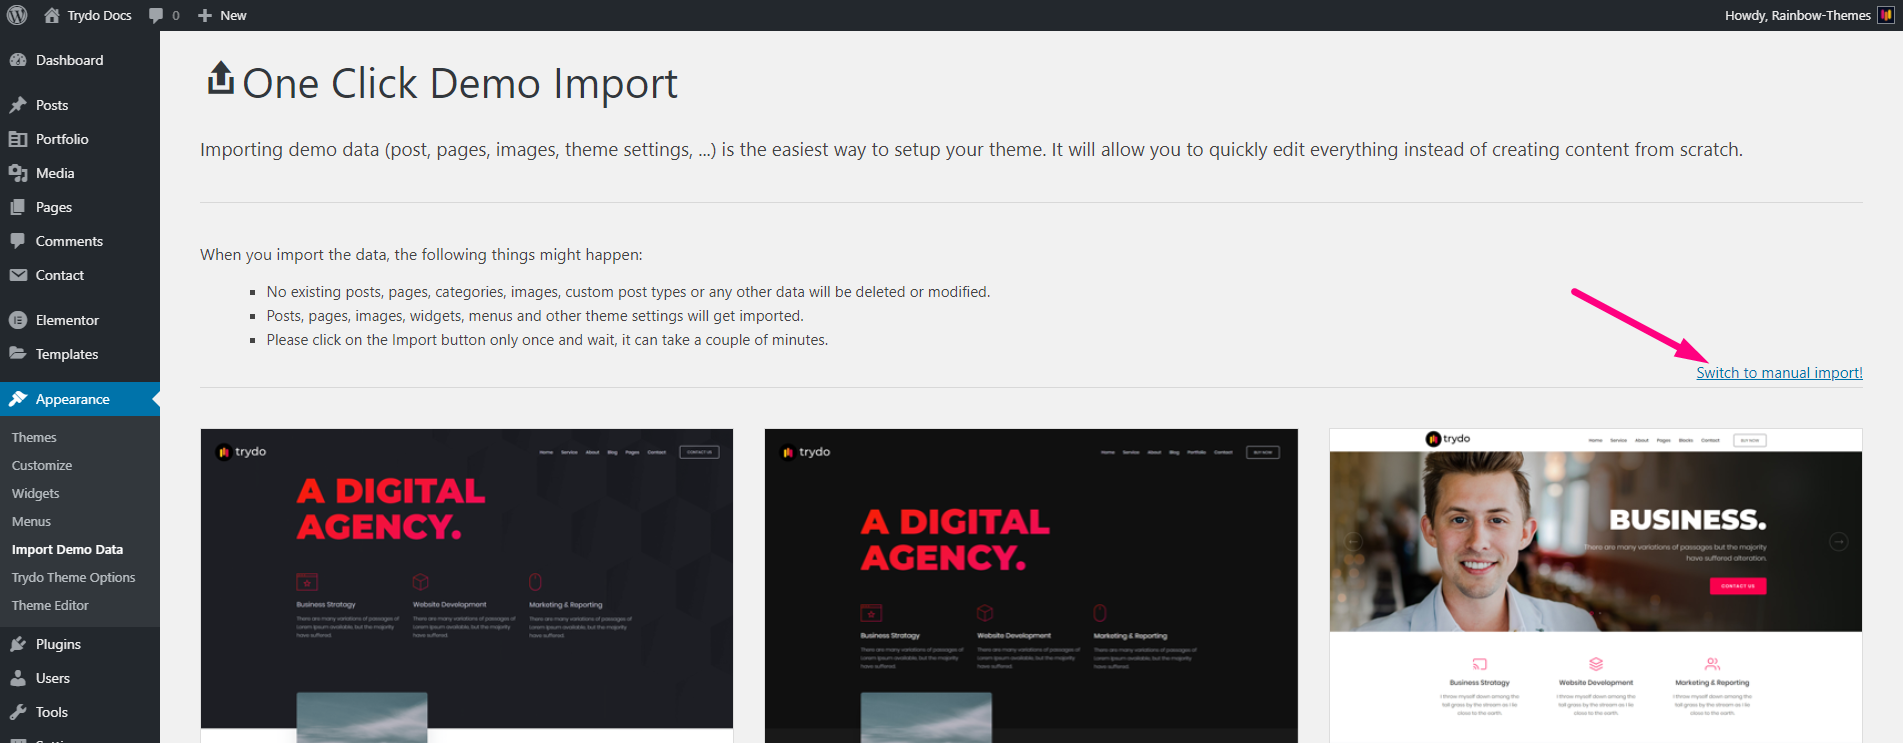 Click switch to manual import link